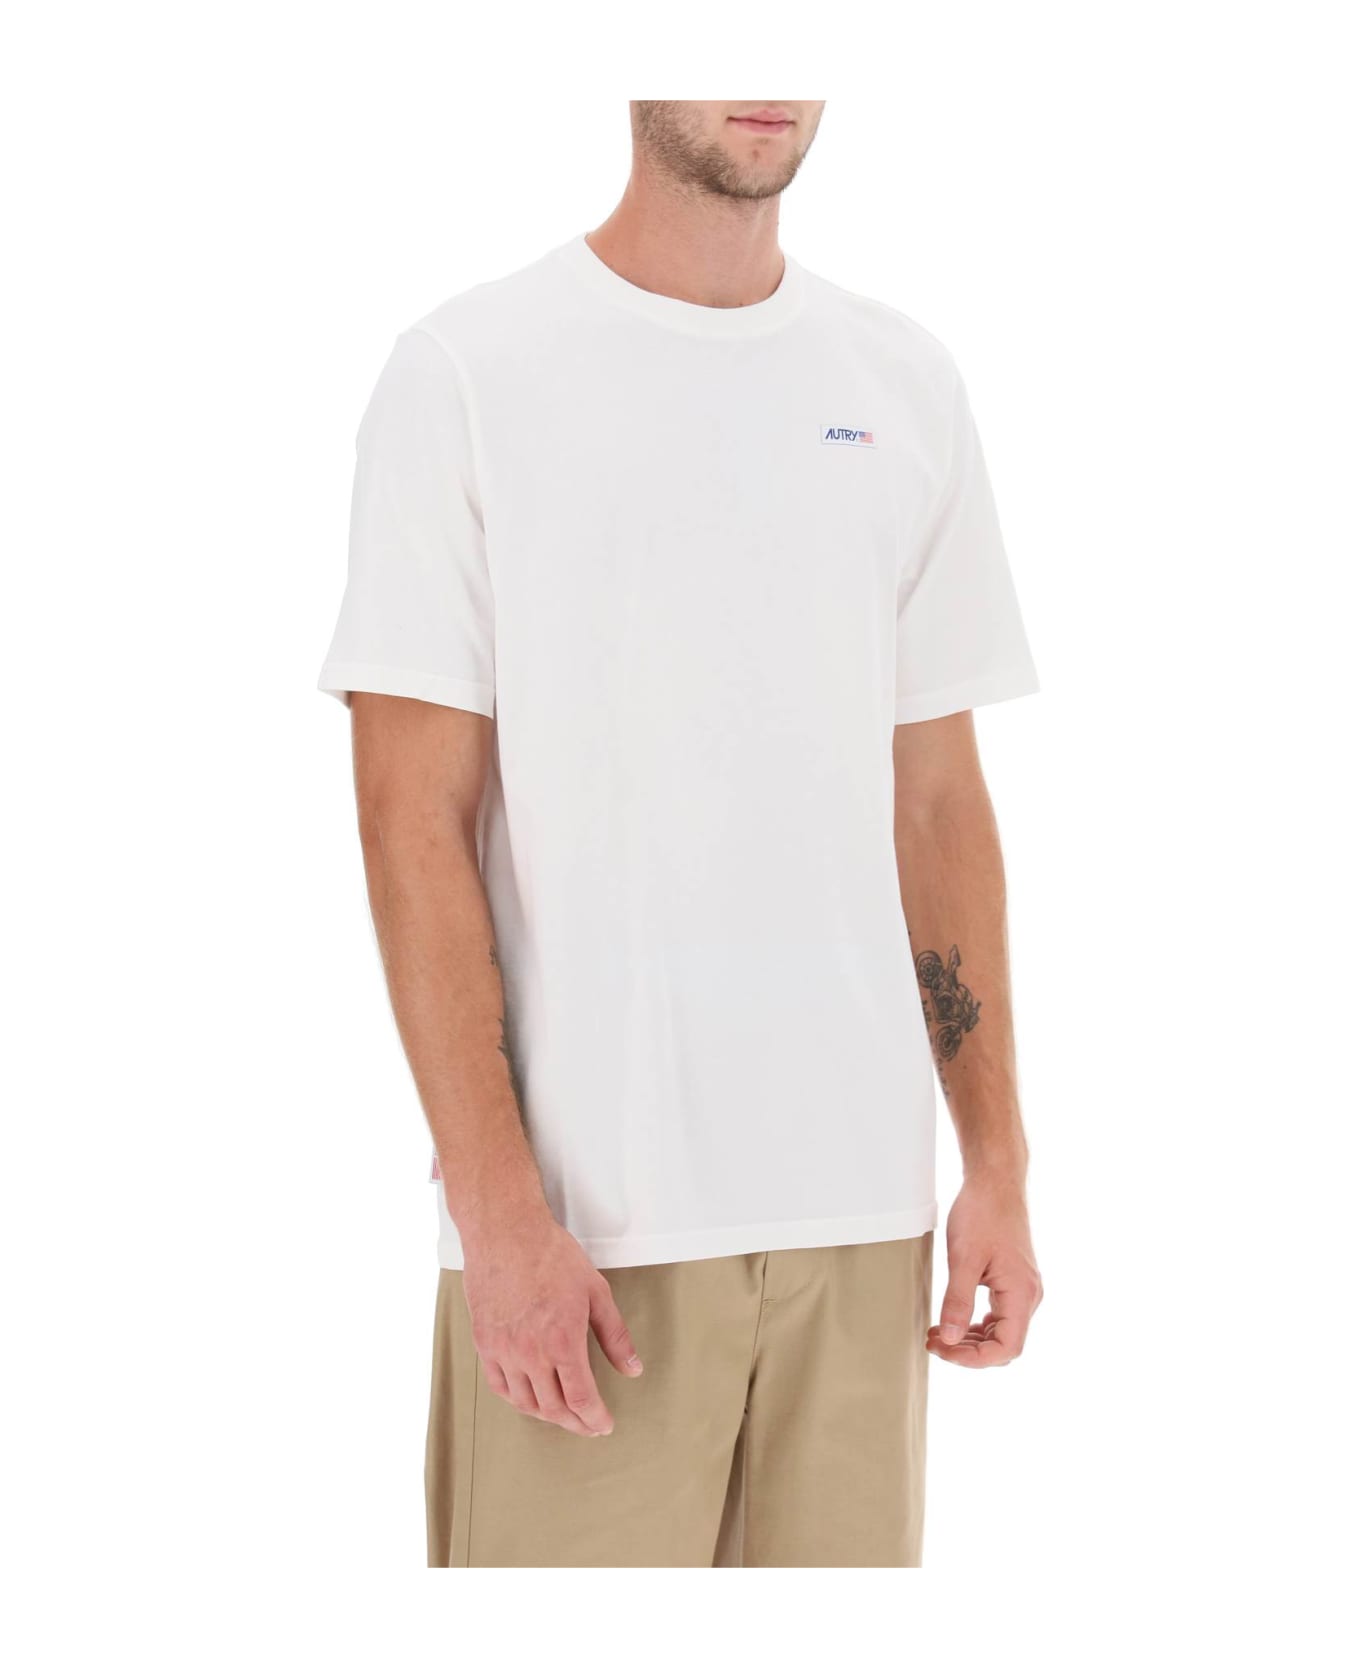 Autry Cotton T-shirt With Logo - White Tシャツ